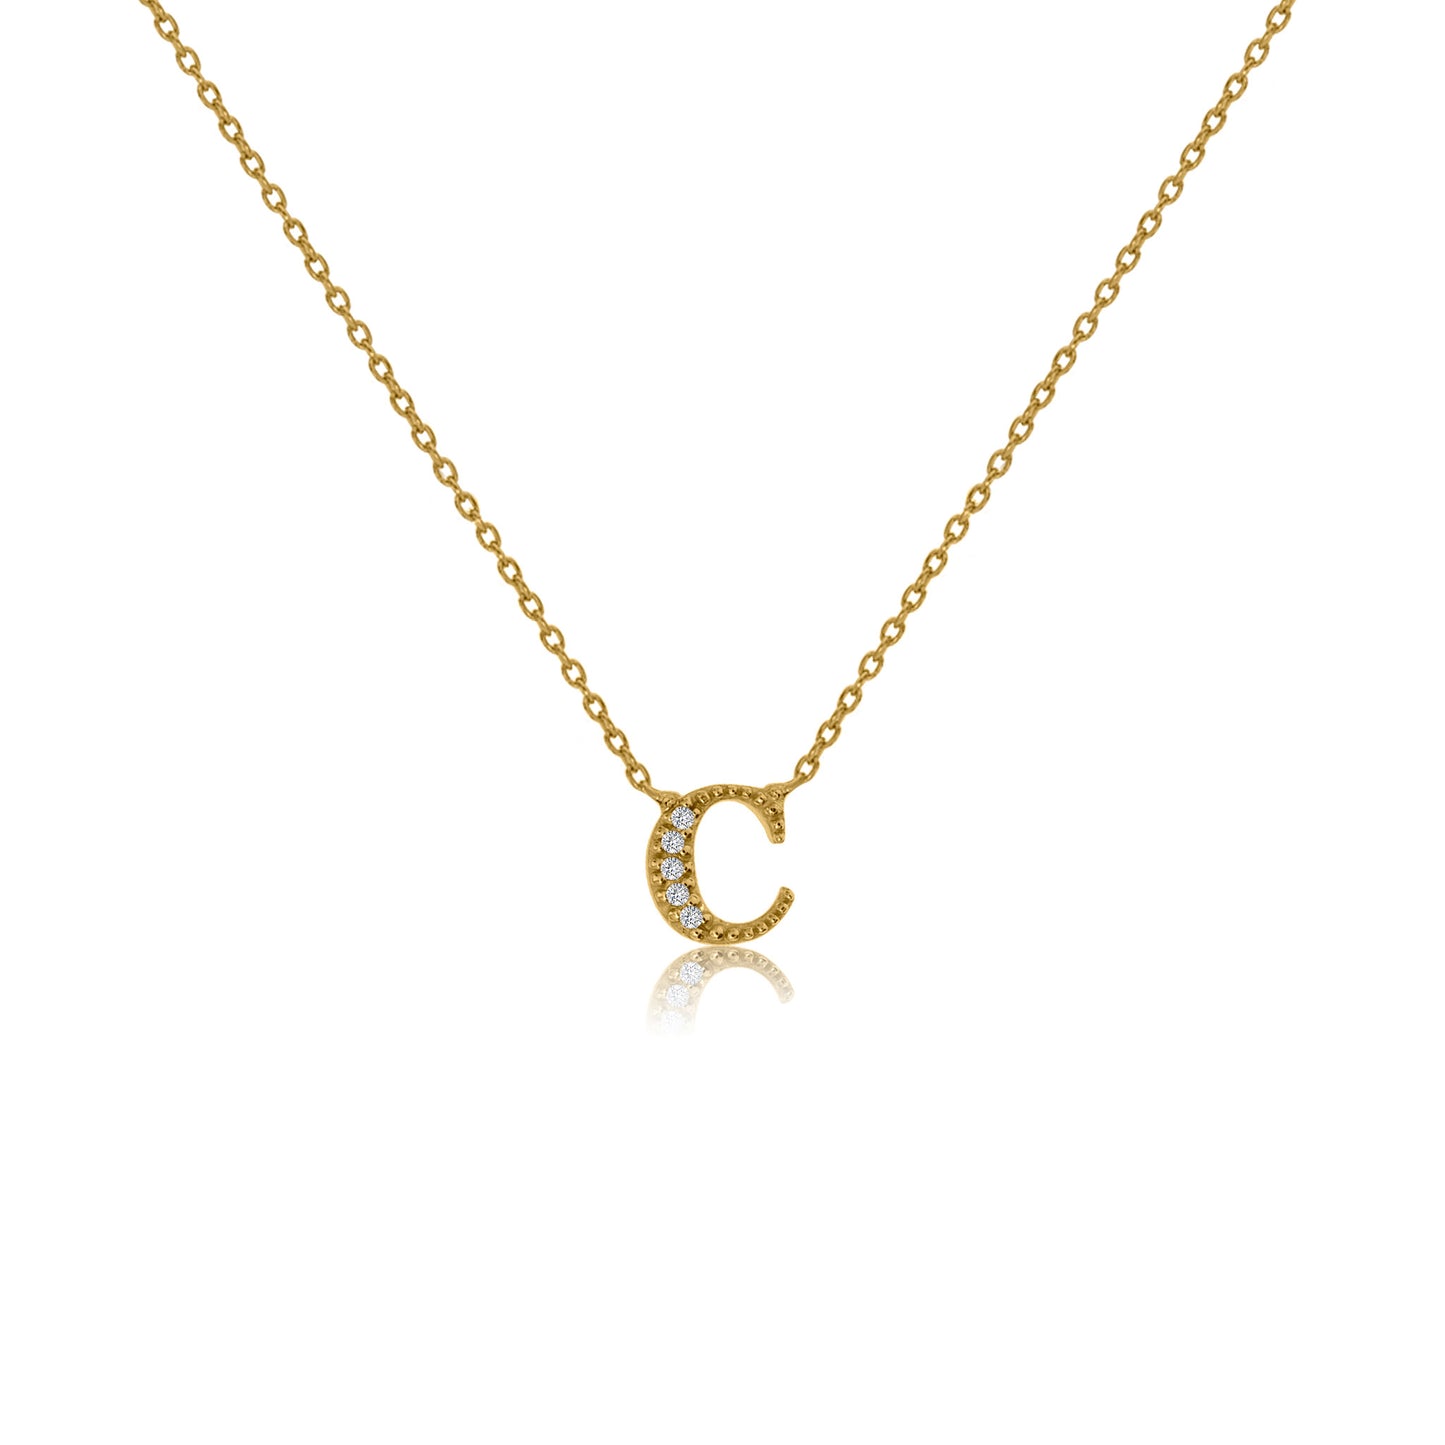 NT-26/G/C - Initial "C" Necklace with Sliding Length Adjuster